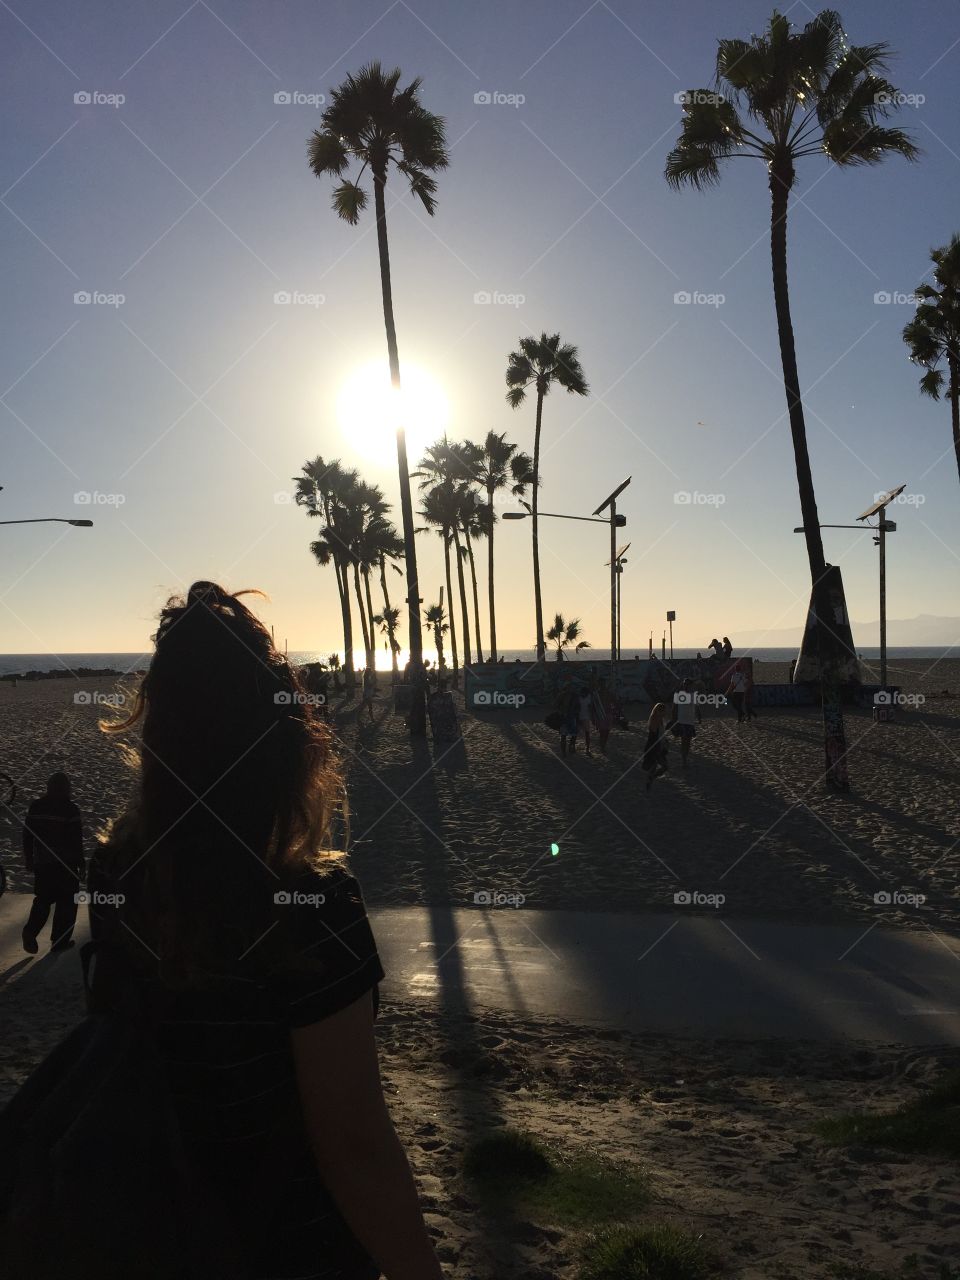 Sunset at Venice beach in Los Angeles California 